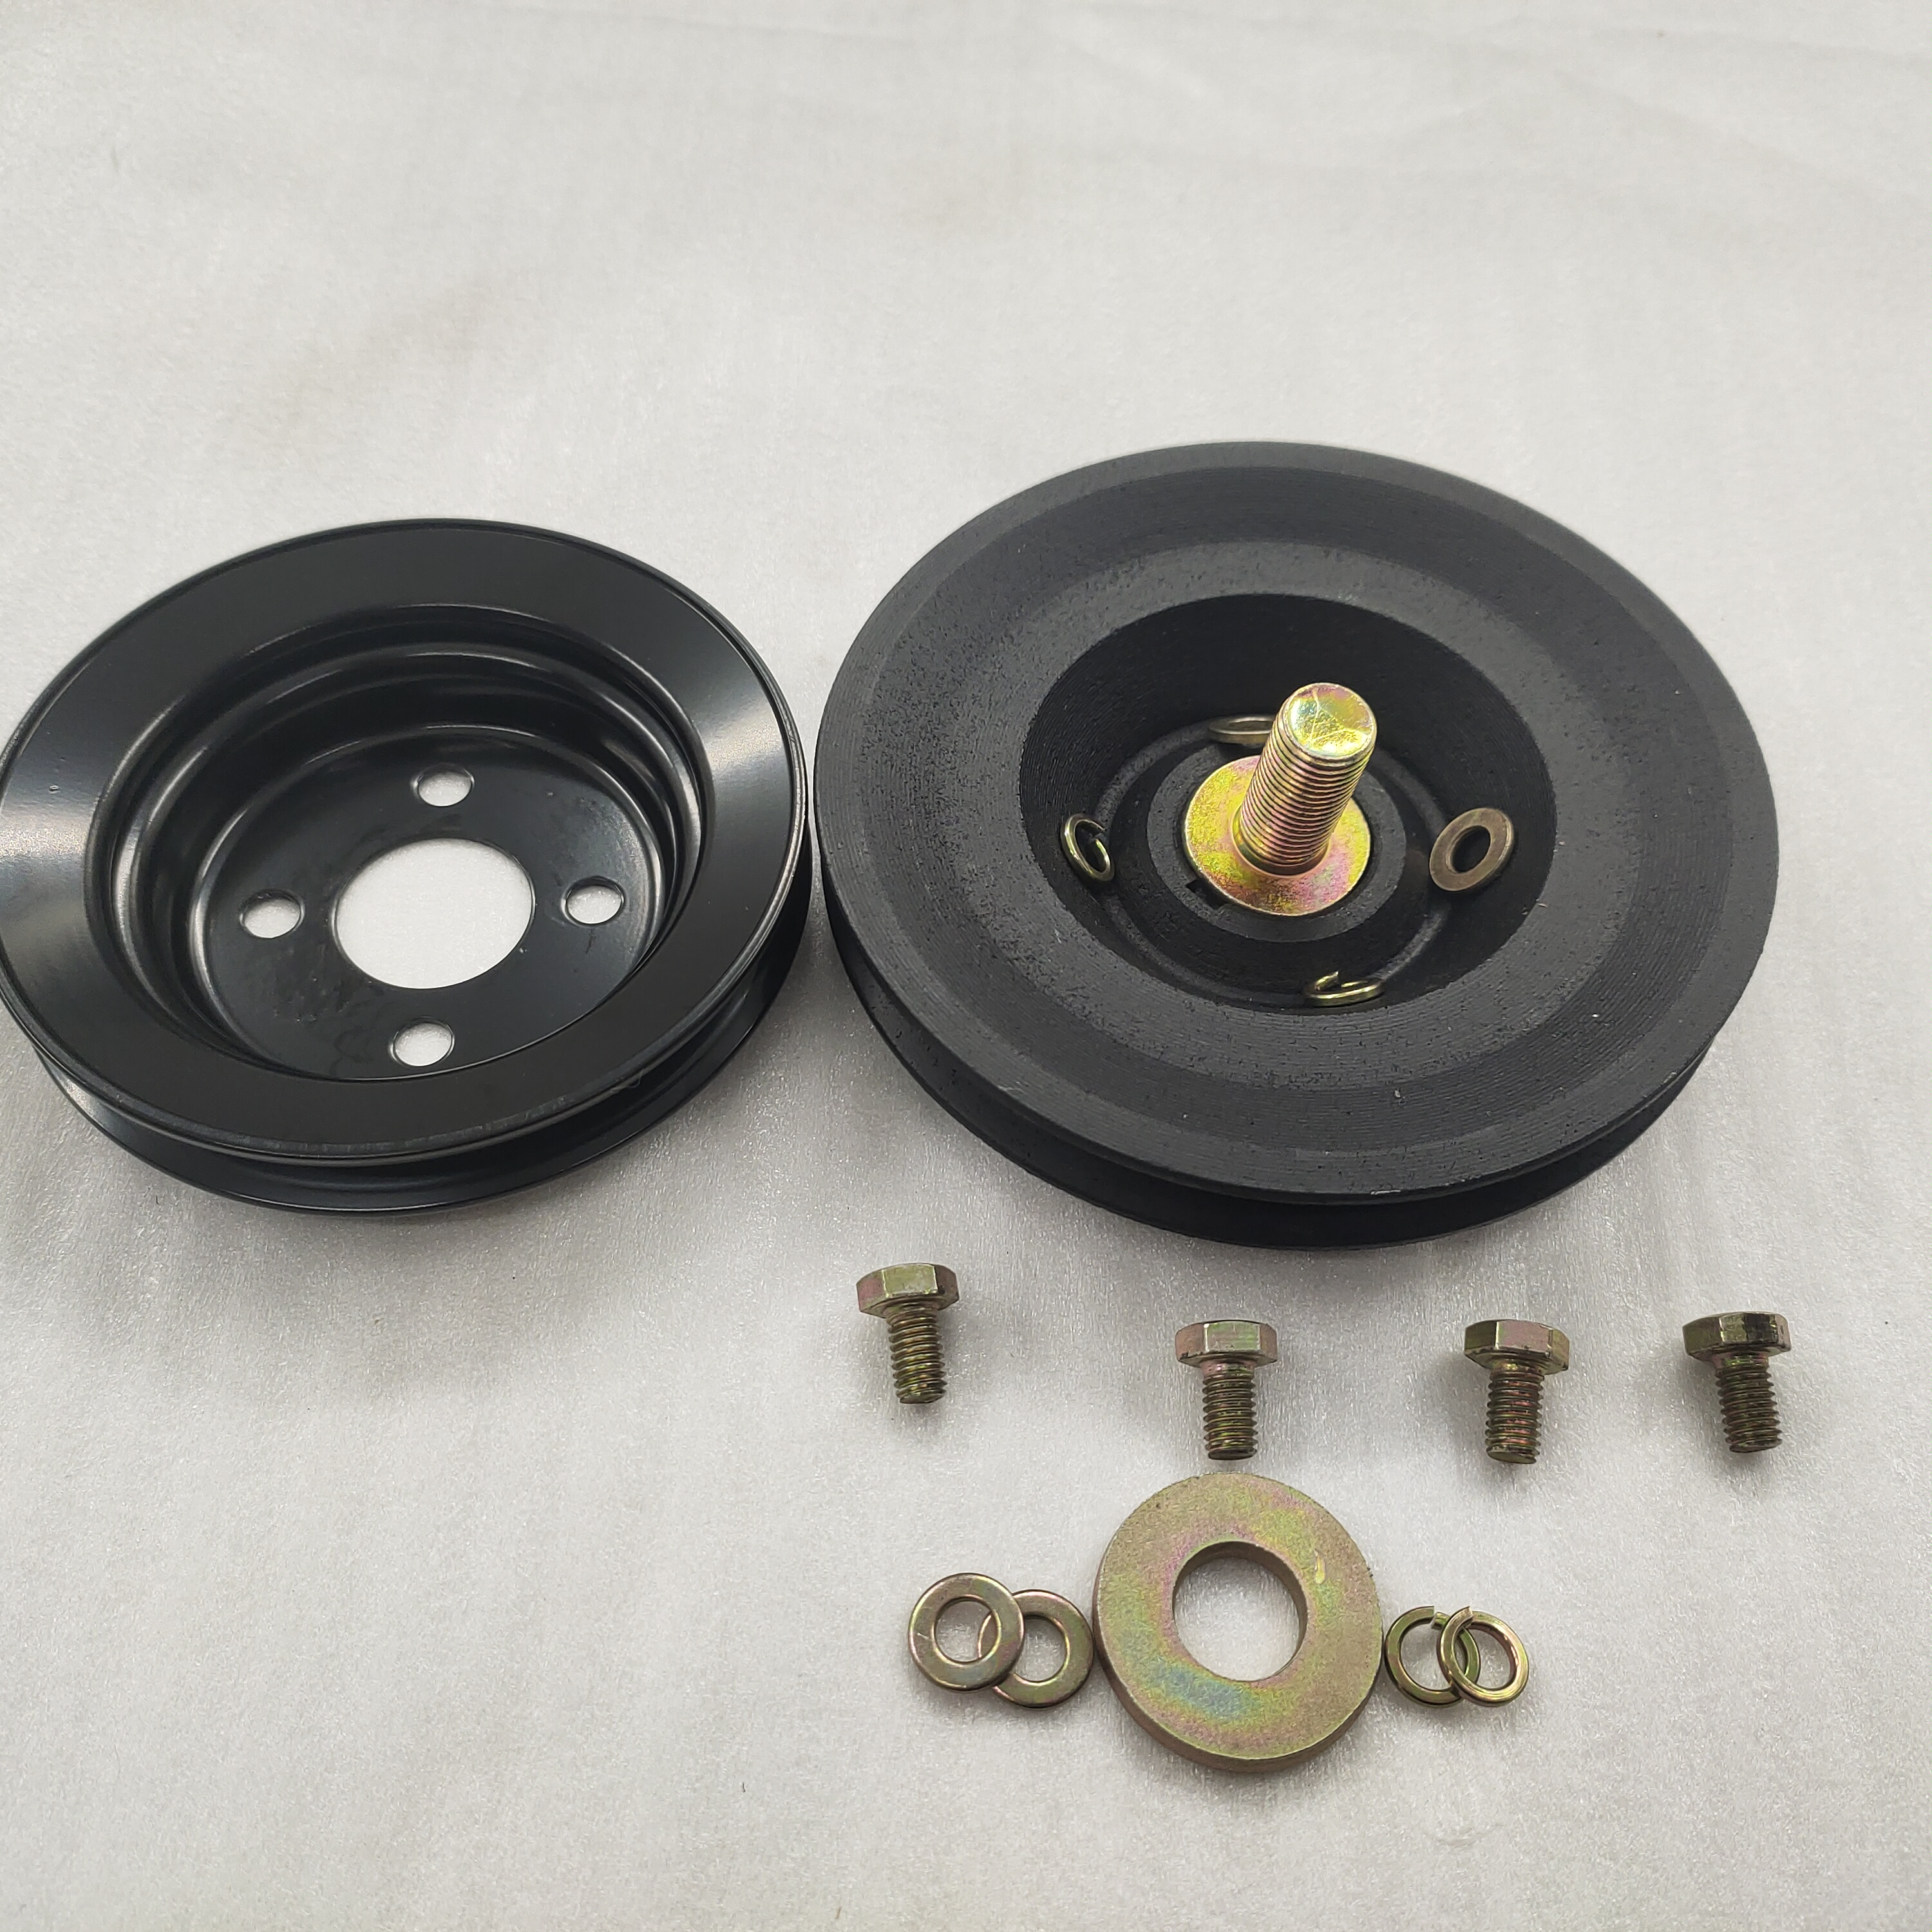 Newest Dayang Tricycle Three Wheel Truck 800cc Water-cooled Engine Parts Spare Part Pulley